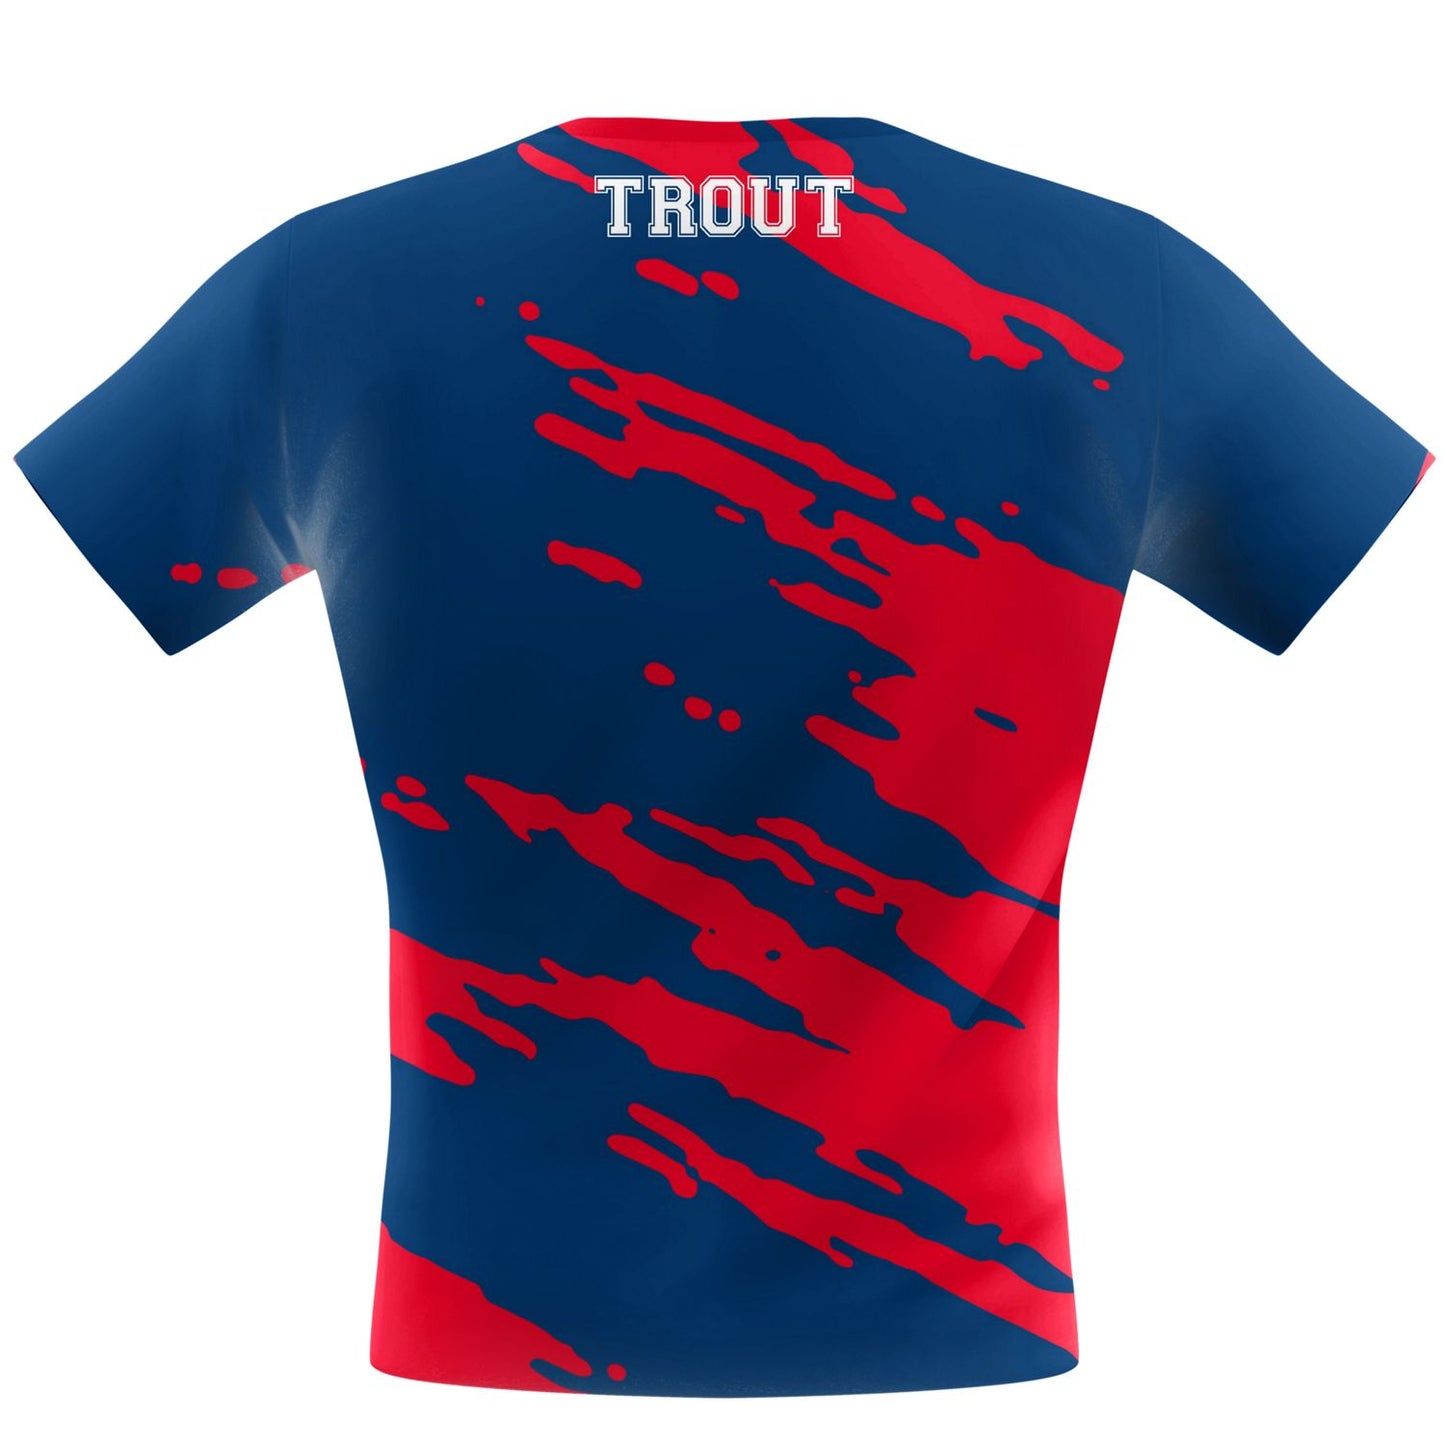 Trout Performance Shirt Male